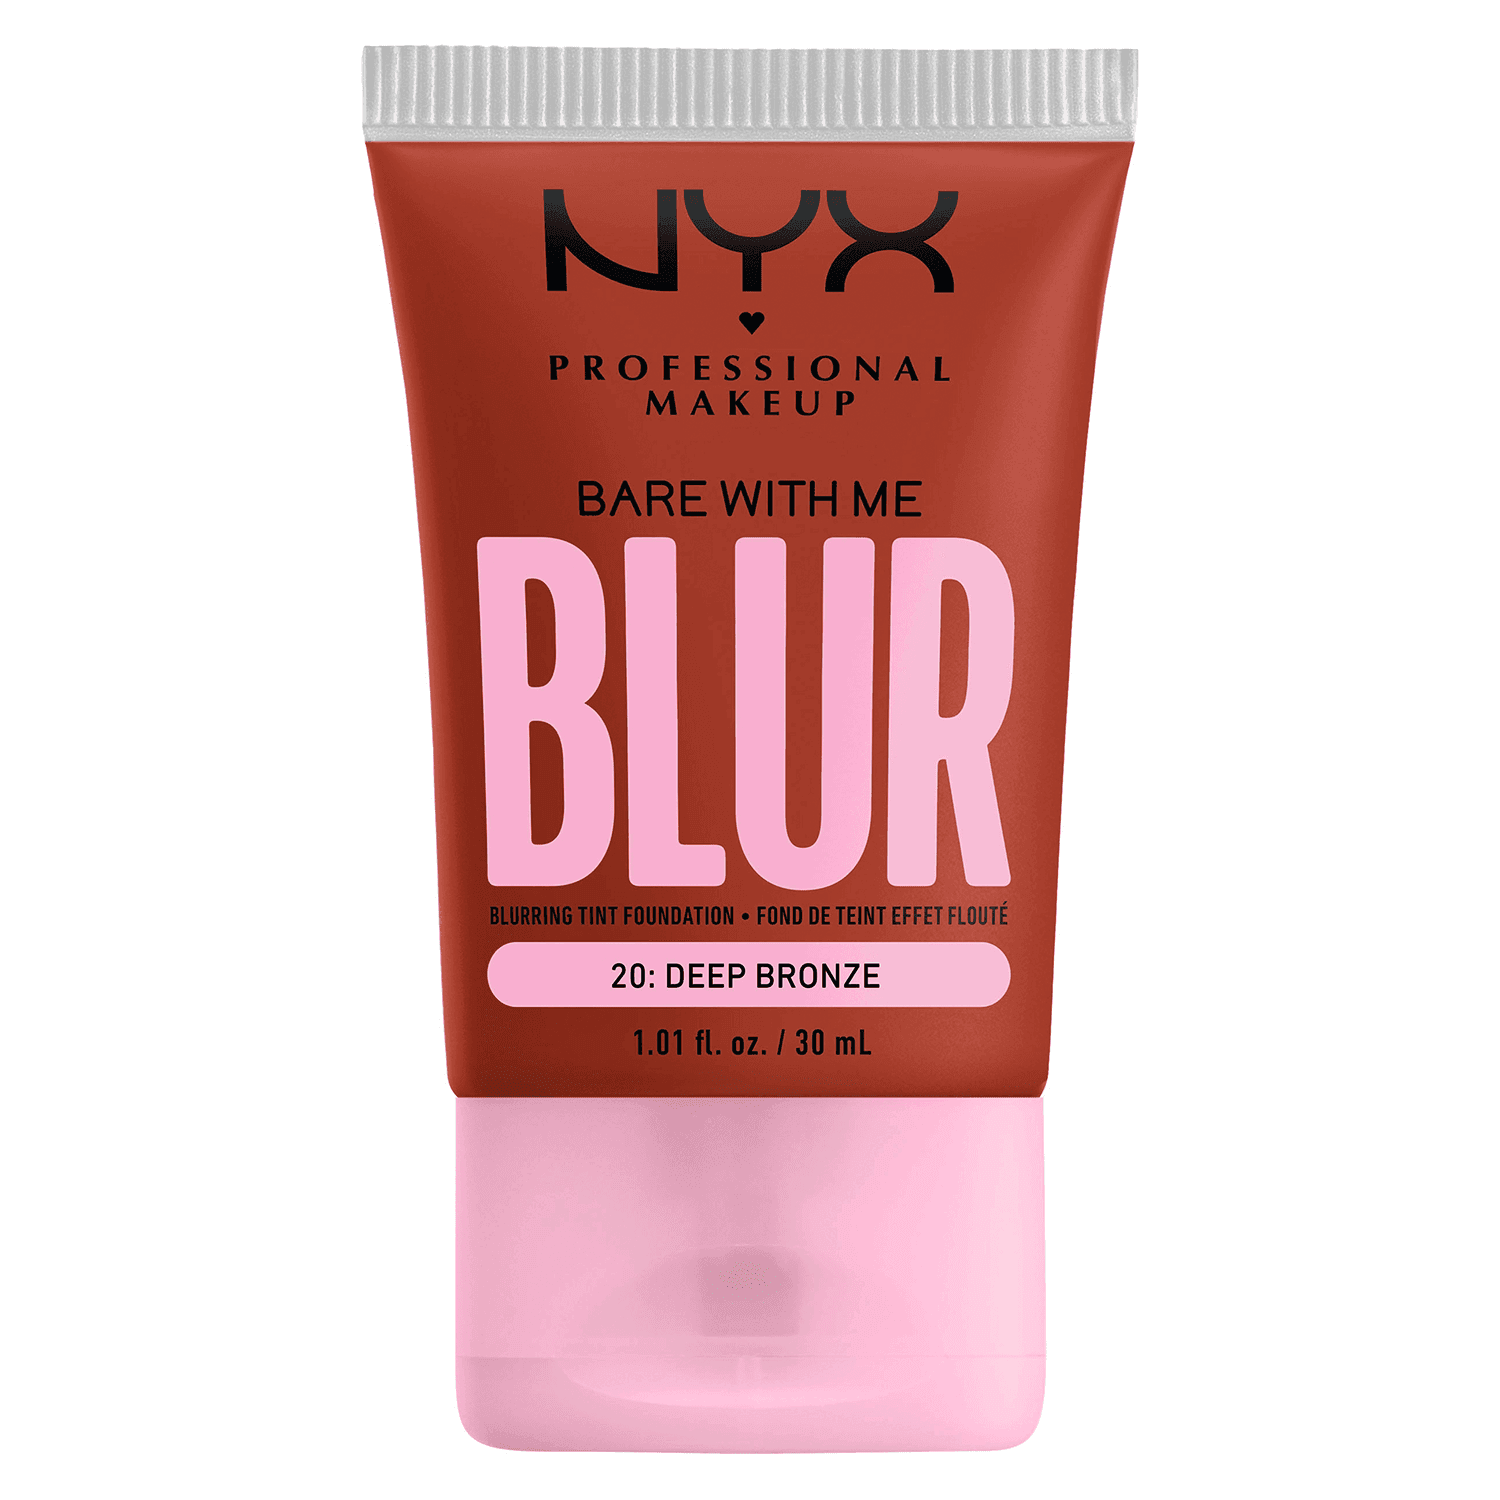 Bare with me - Blur Tint Foundation Deep Bronze 20